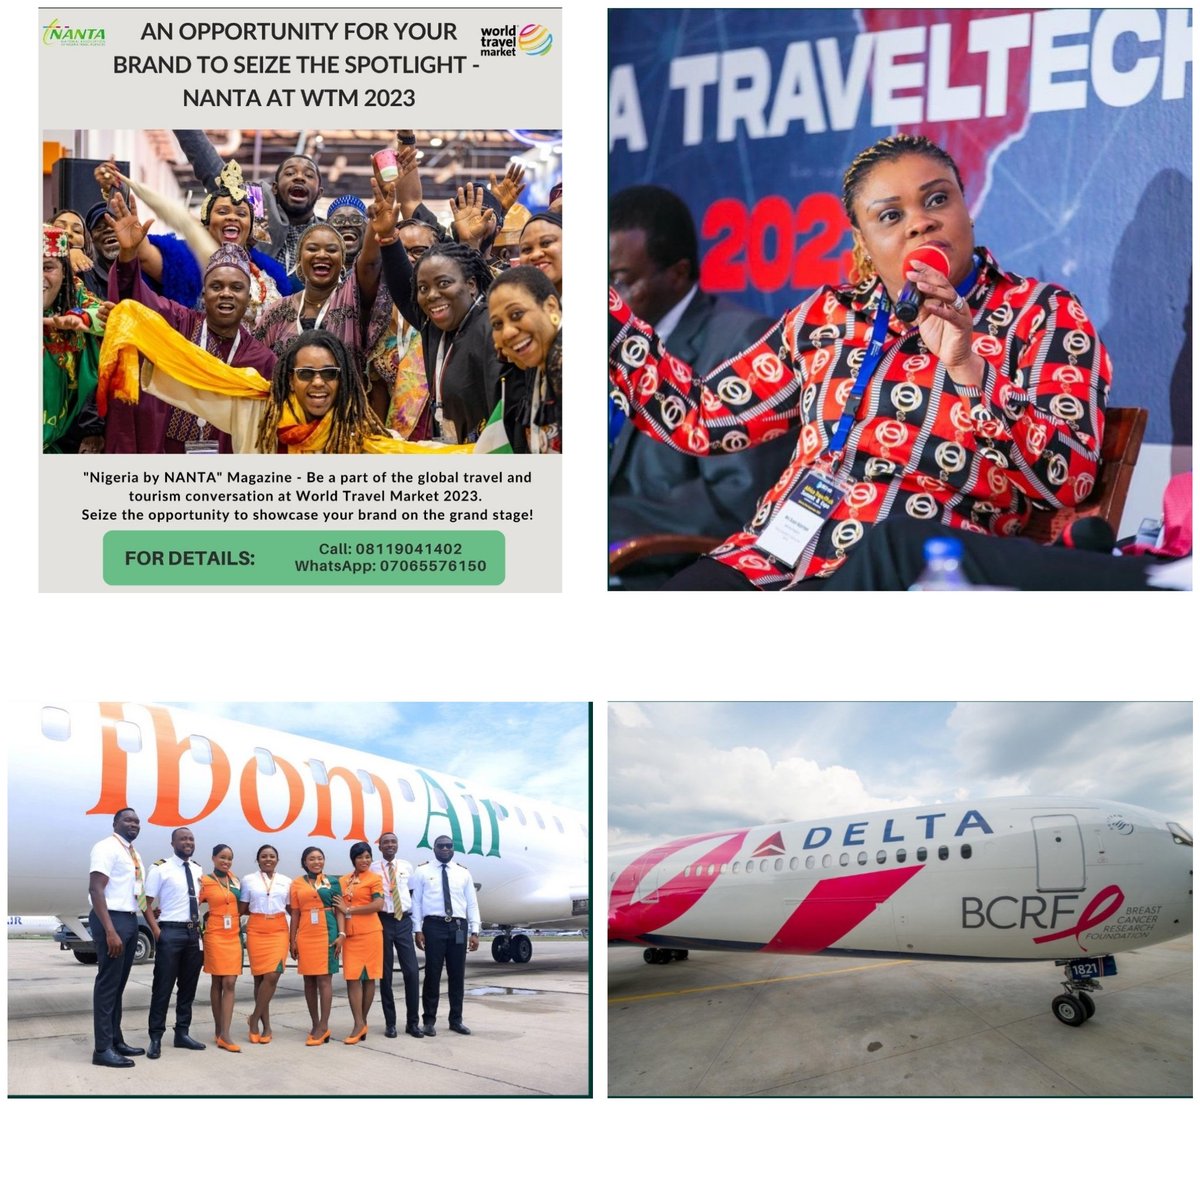 In this 17th edition of @nanta_headquart #NantaNewsletter ...

- NANTA plans big for WTM London 2023 

- NANTA President, Mrs Susan Akporiaye supports travel tech opportunities 

Read current and previous newsletters and subscribe for free mailchi.mp/18614223e826/n…

1/2